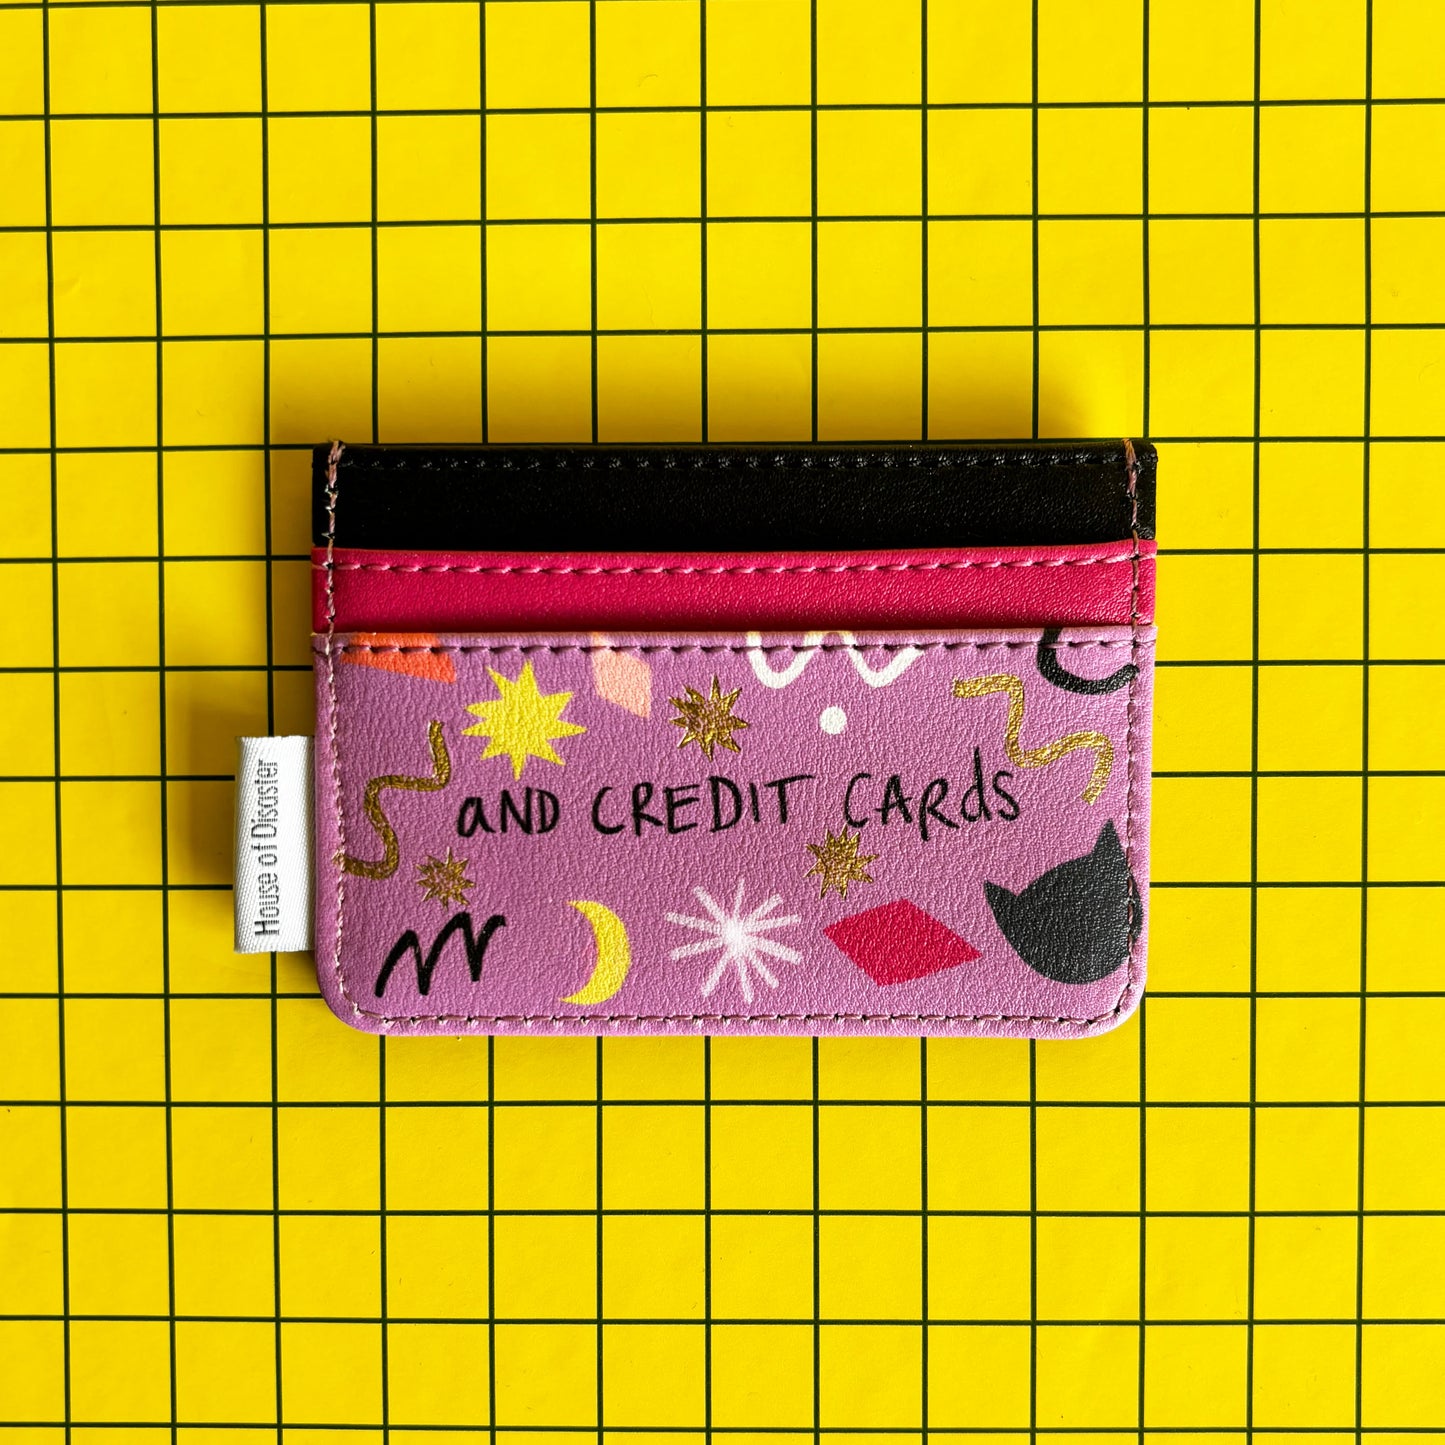 House of Disaster - Small Talk ‘I Love Cats’ Cardholder